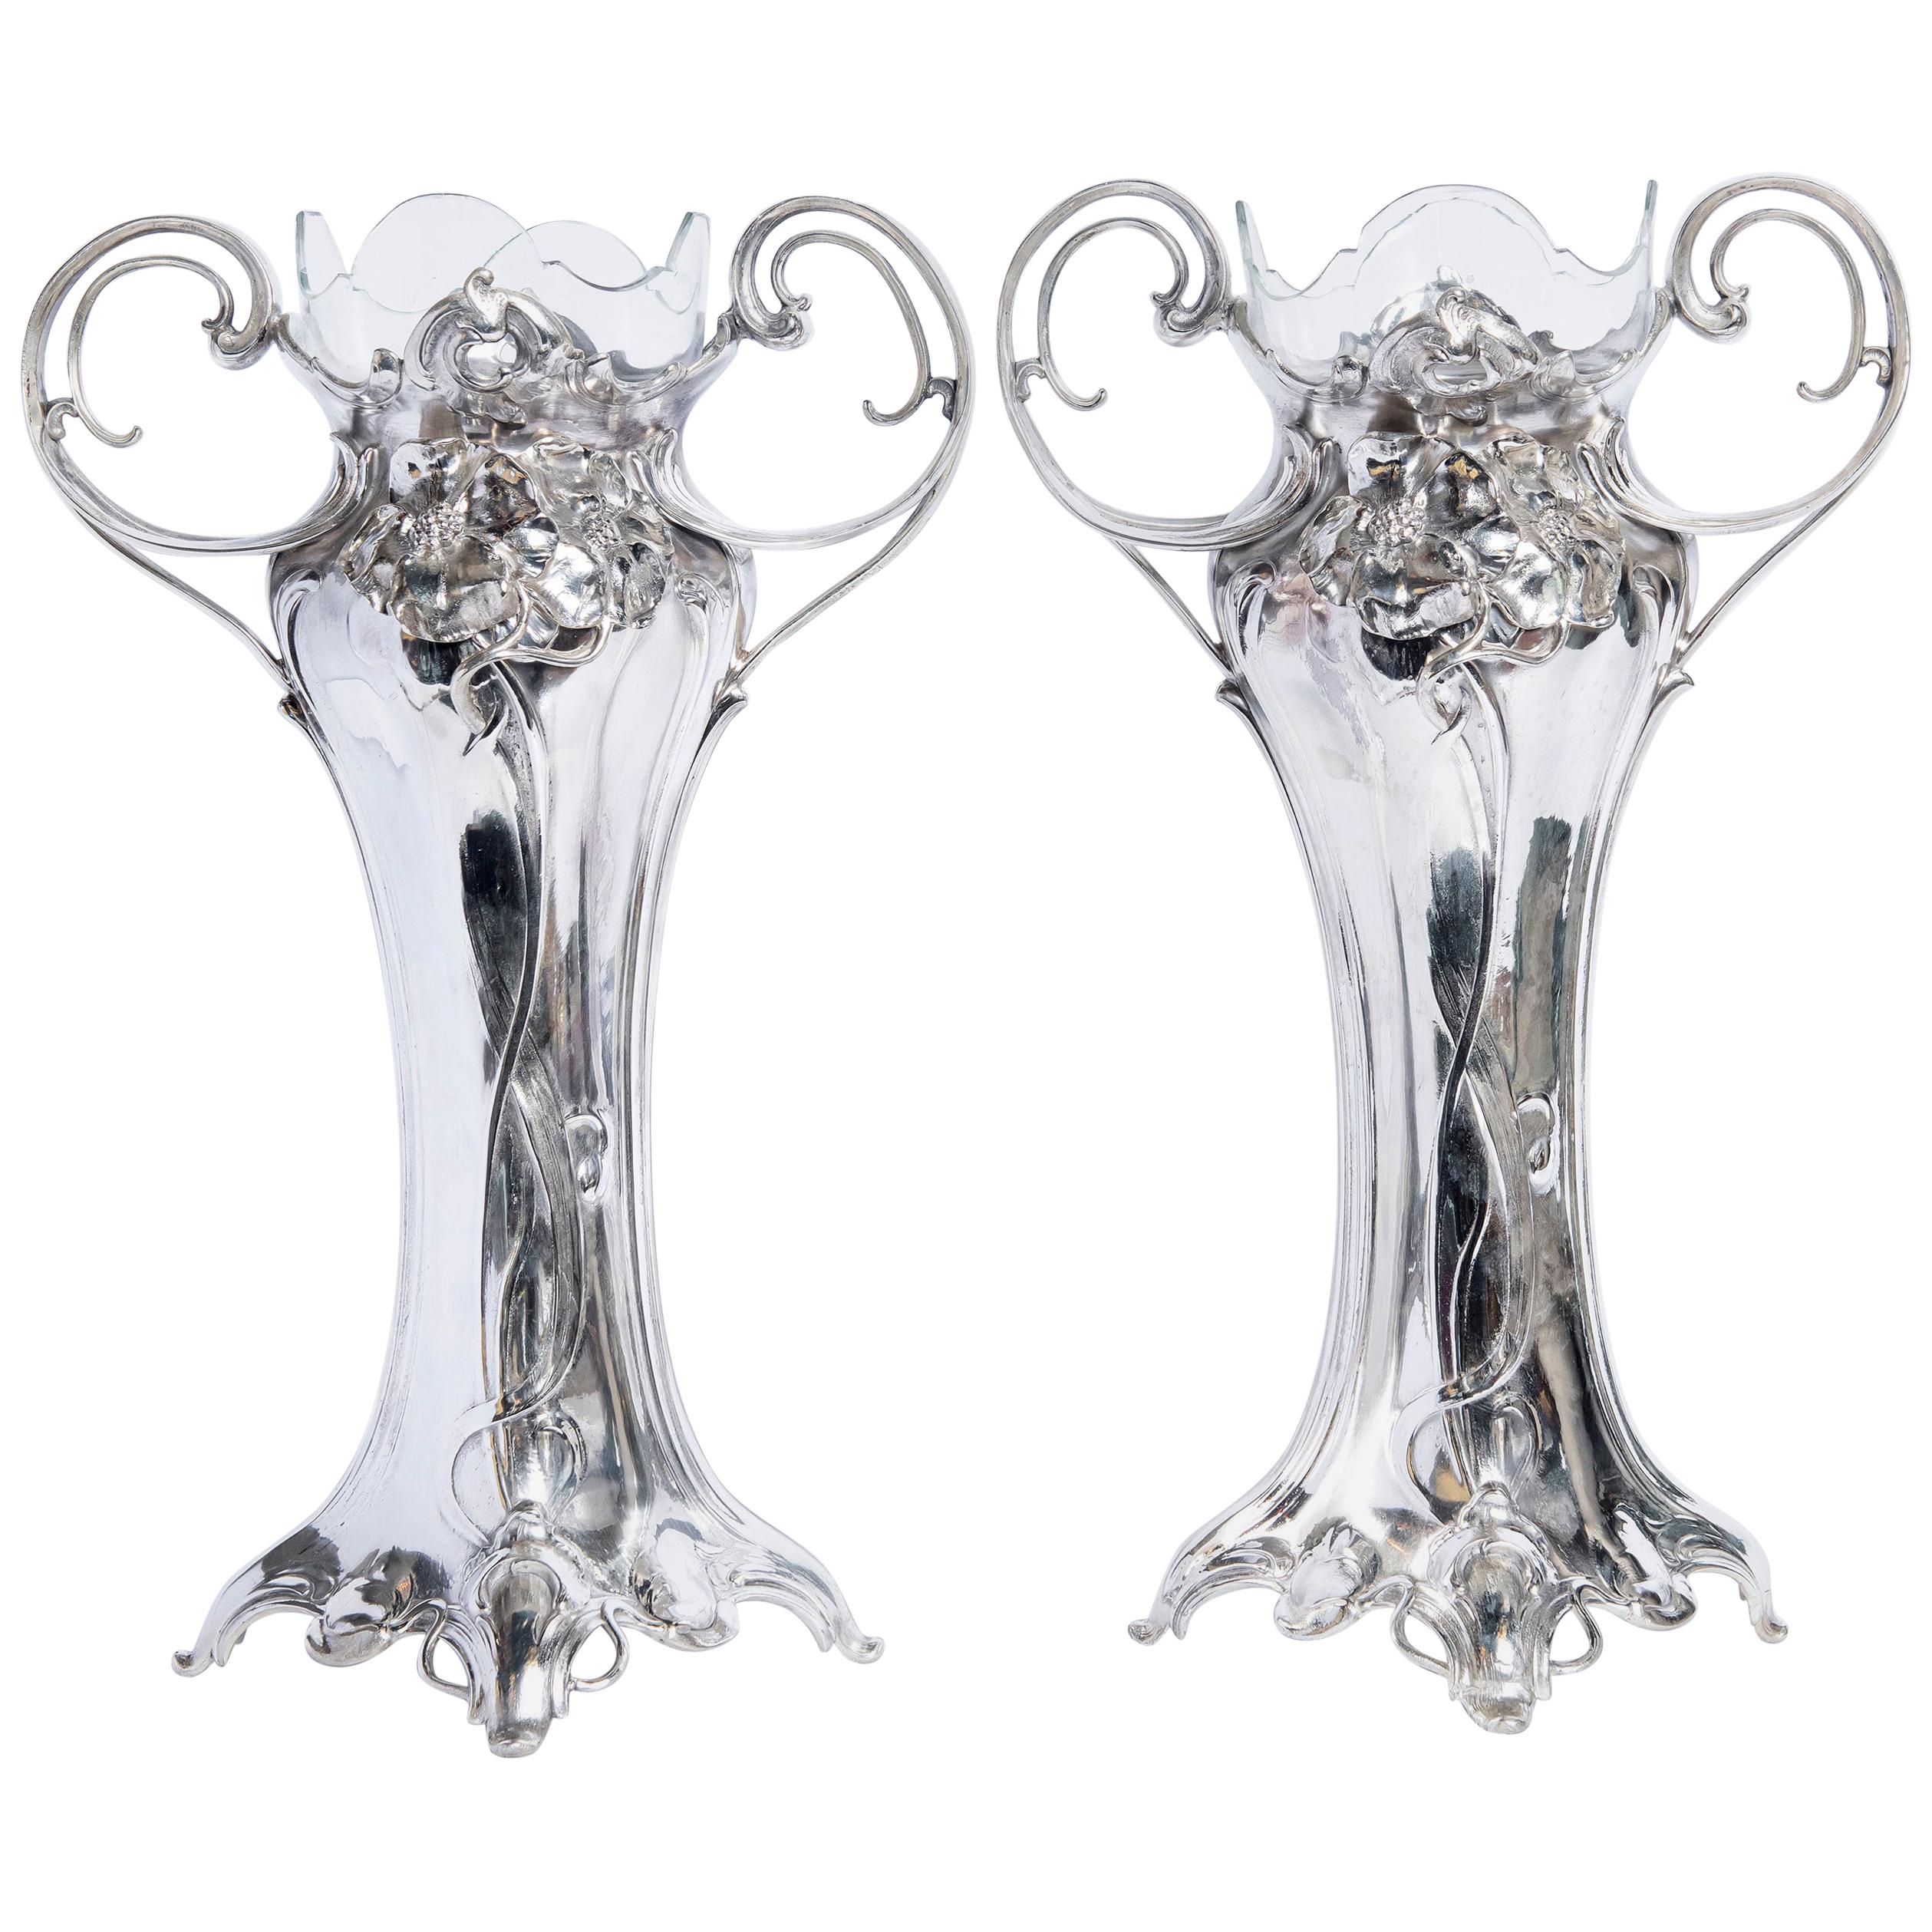 Pair of W.M.F. Silver Plate Flower Vases with Glass, Jugendstil Period